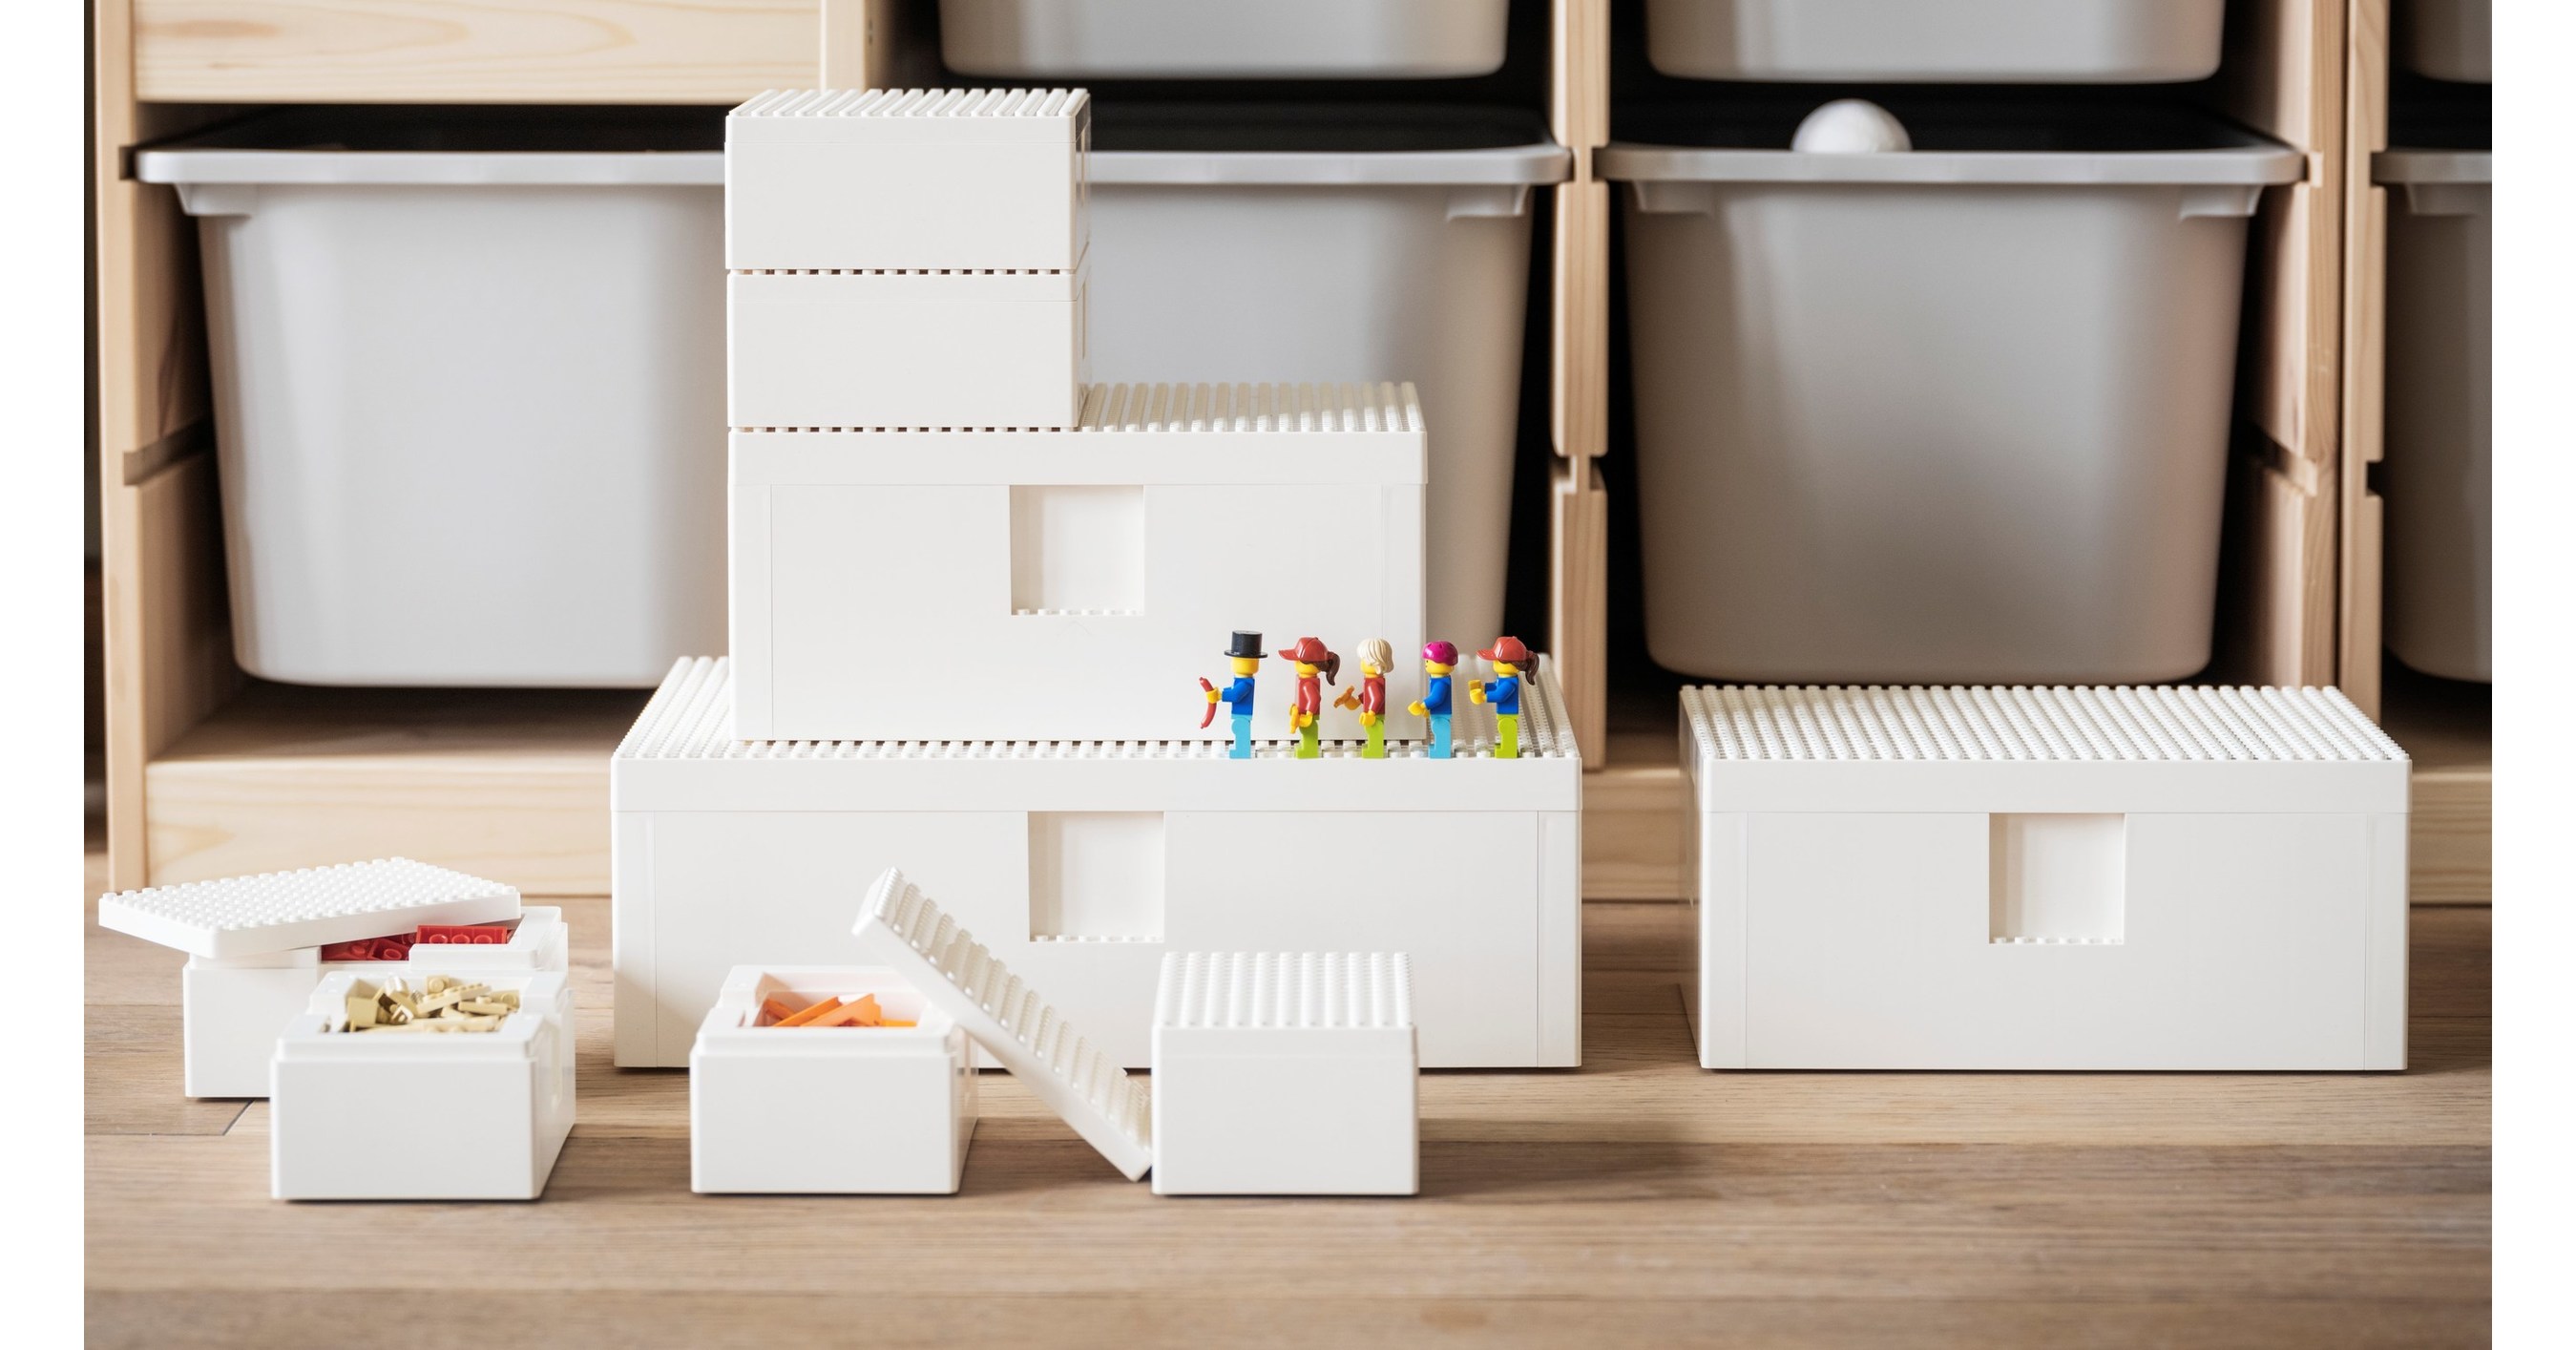 Ikea and Lego built the storage boxes of your dreams - The Verge